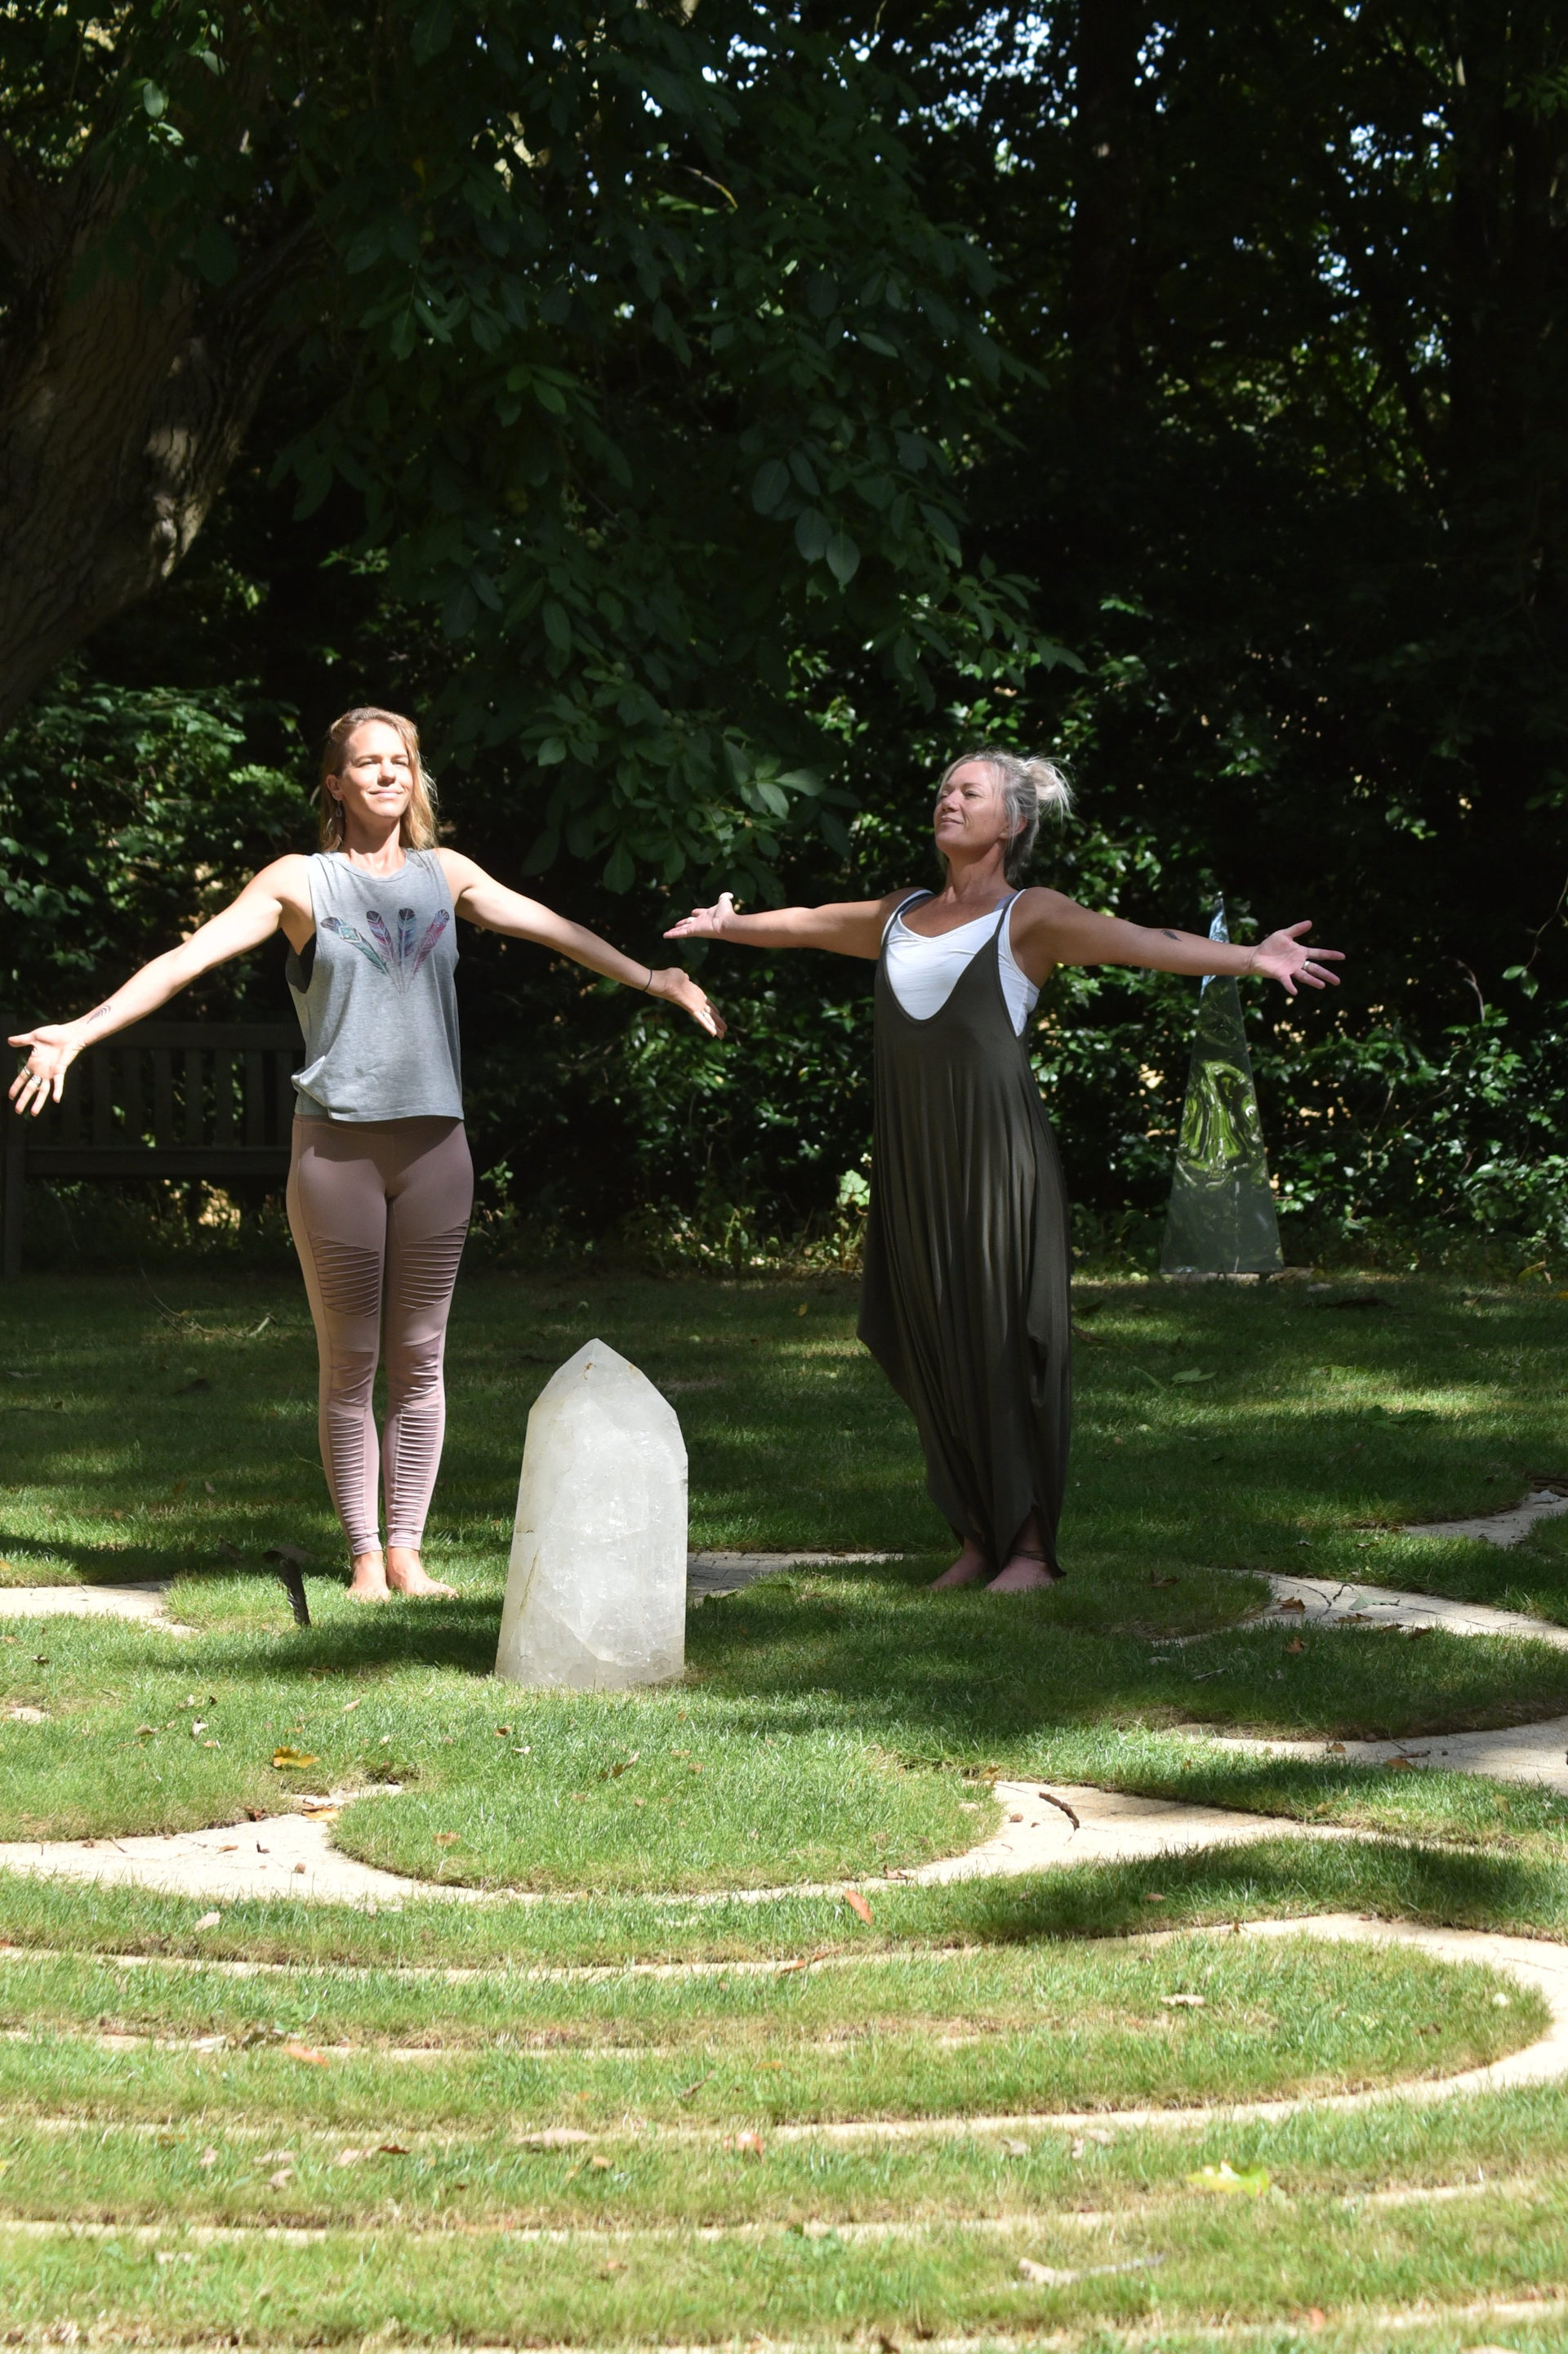 Two women standing in a garden with arms wide open, facing each other with a large clear crystal on the ground between them, surrounded by green trees.